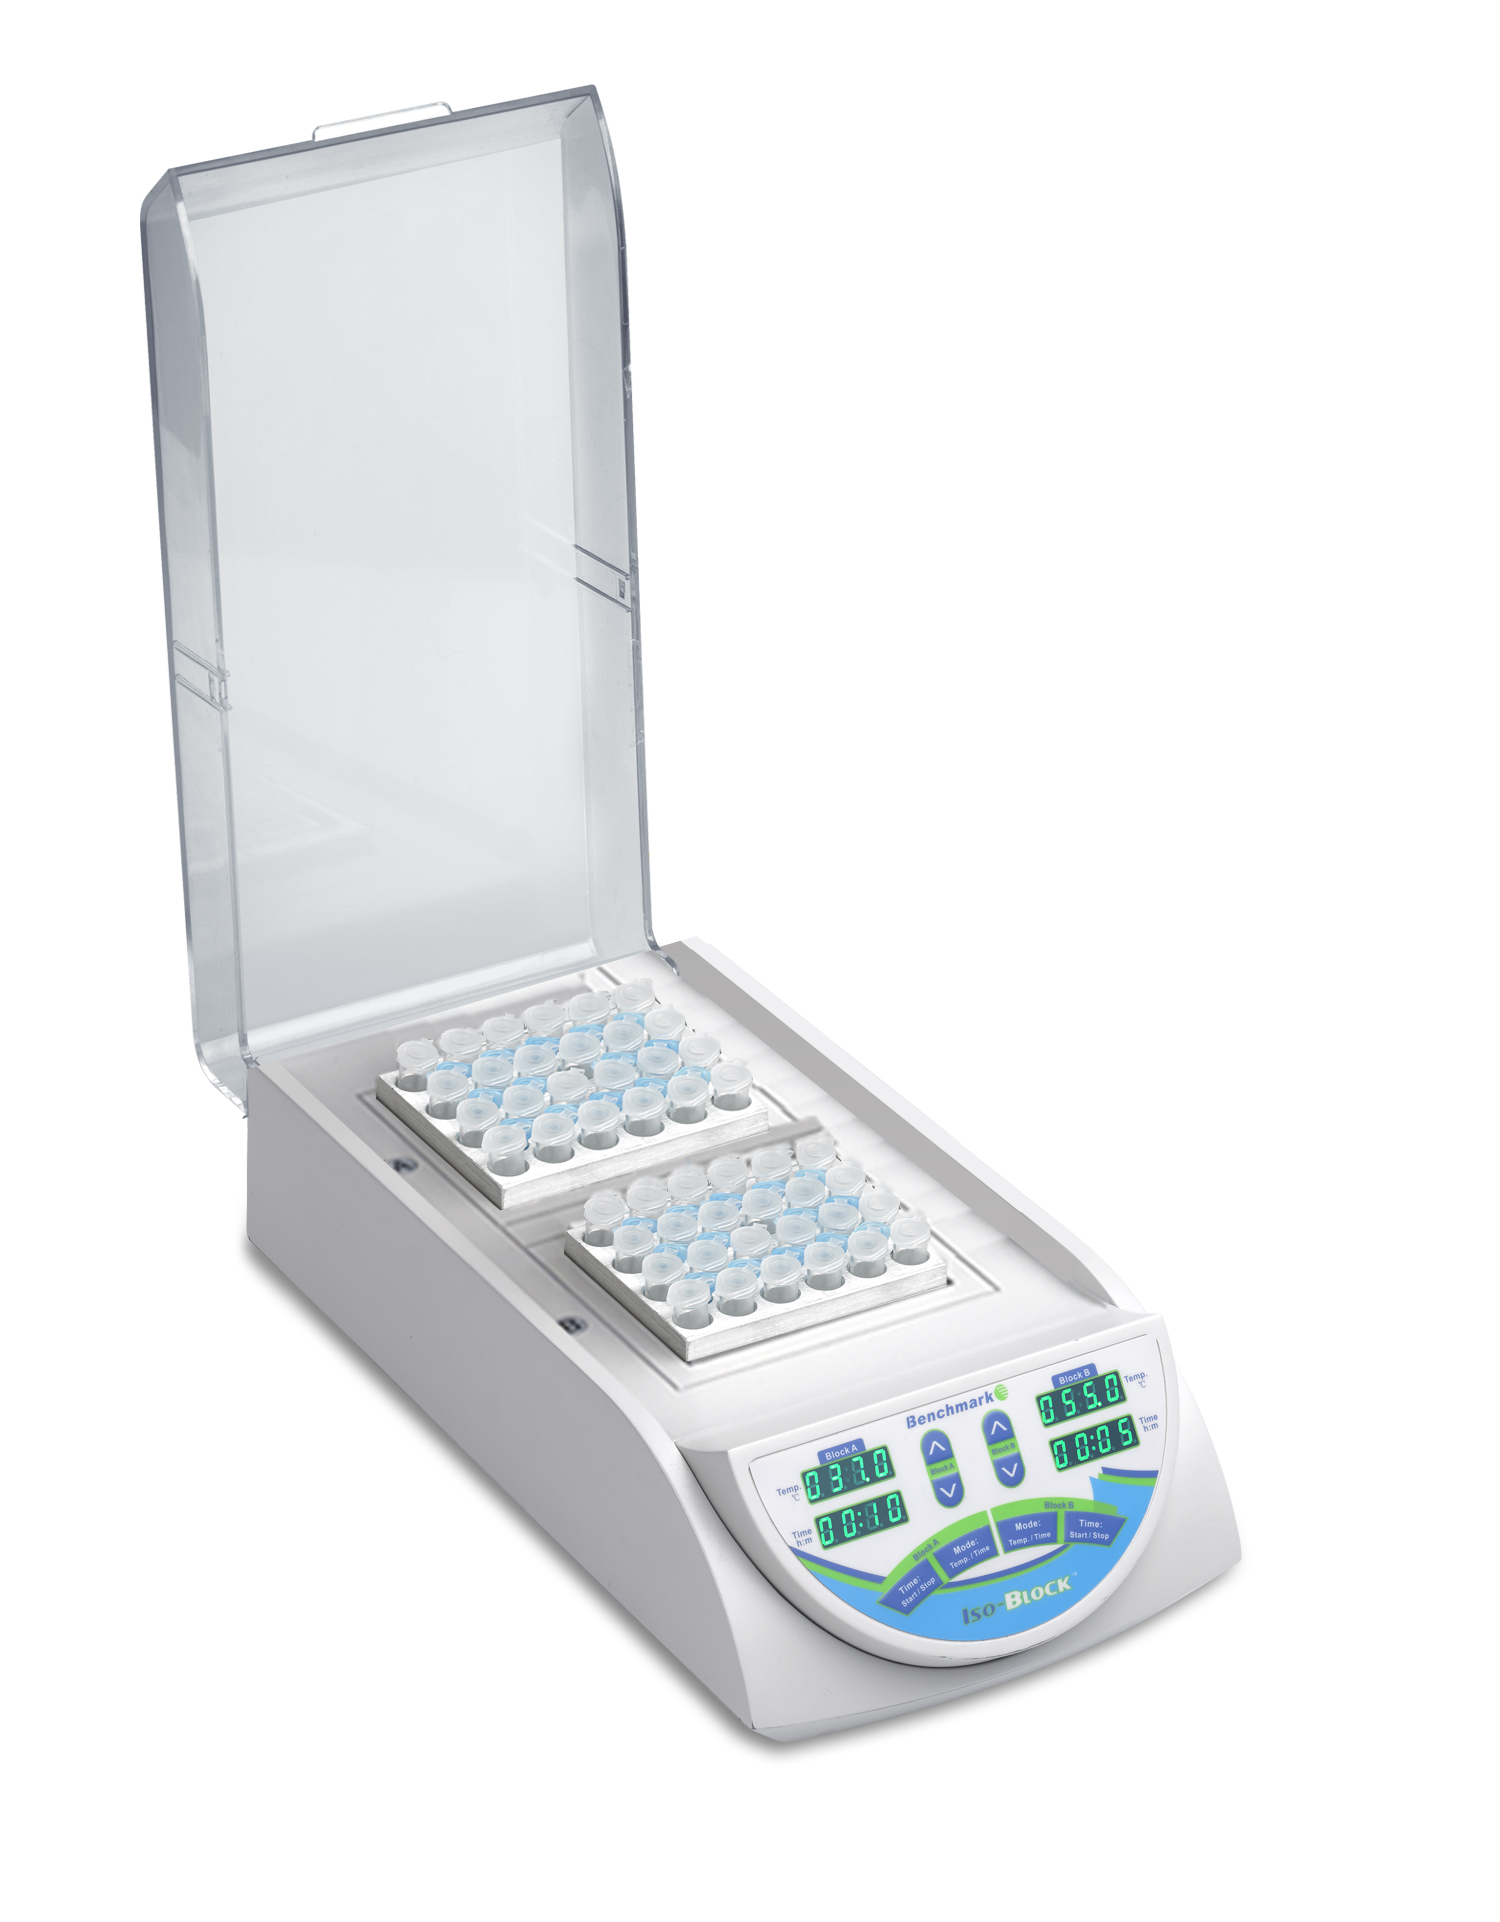  ISOBLOCK DIGITAL DRY BATH W/ TWO INDEPENDENT CHAMBERS